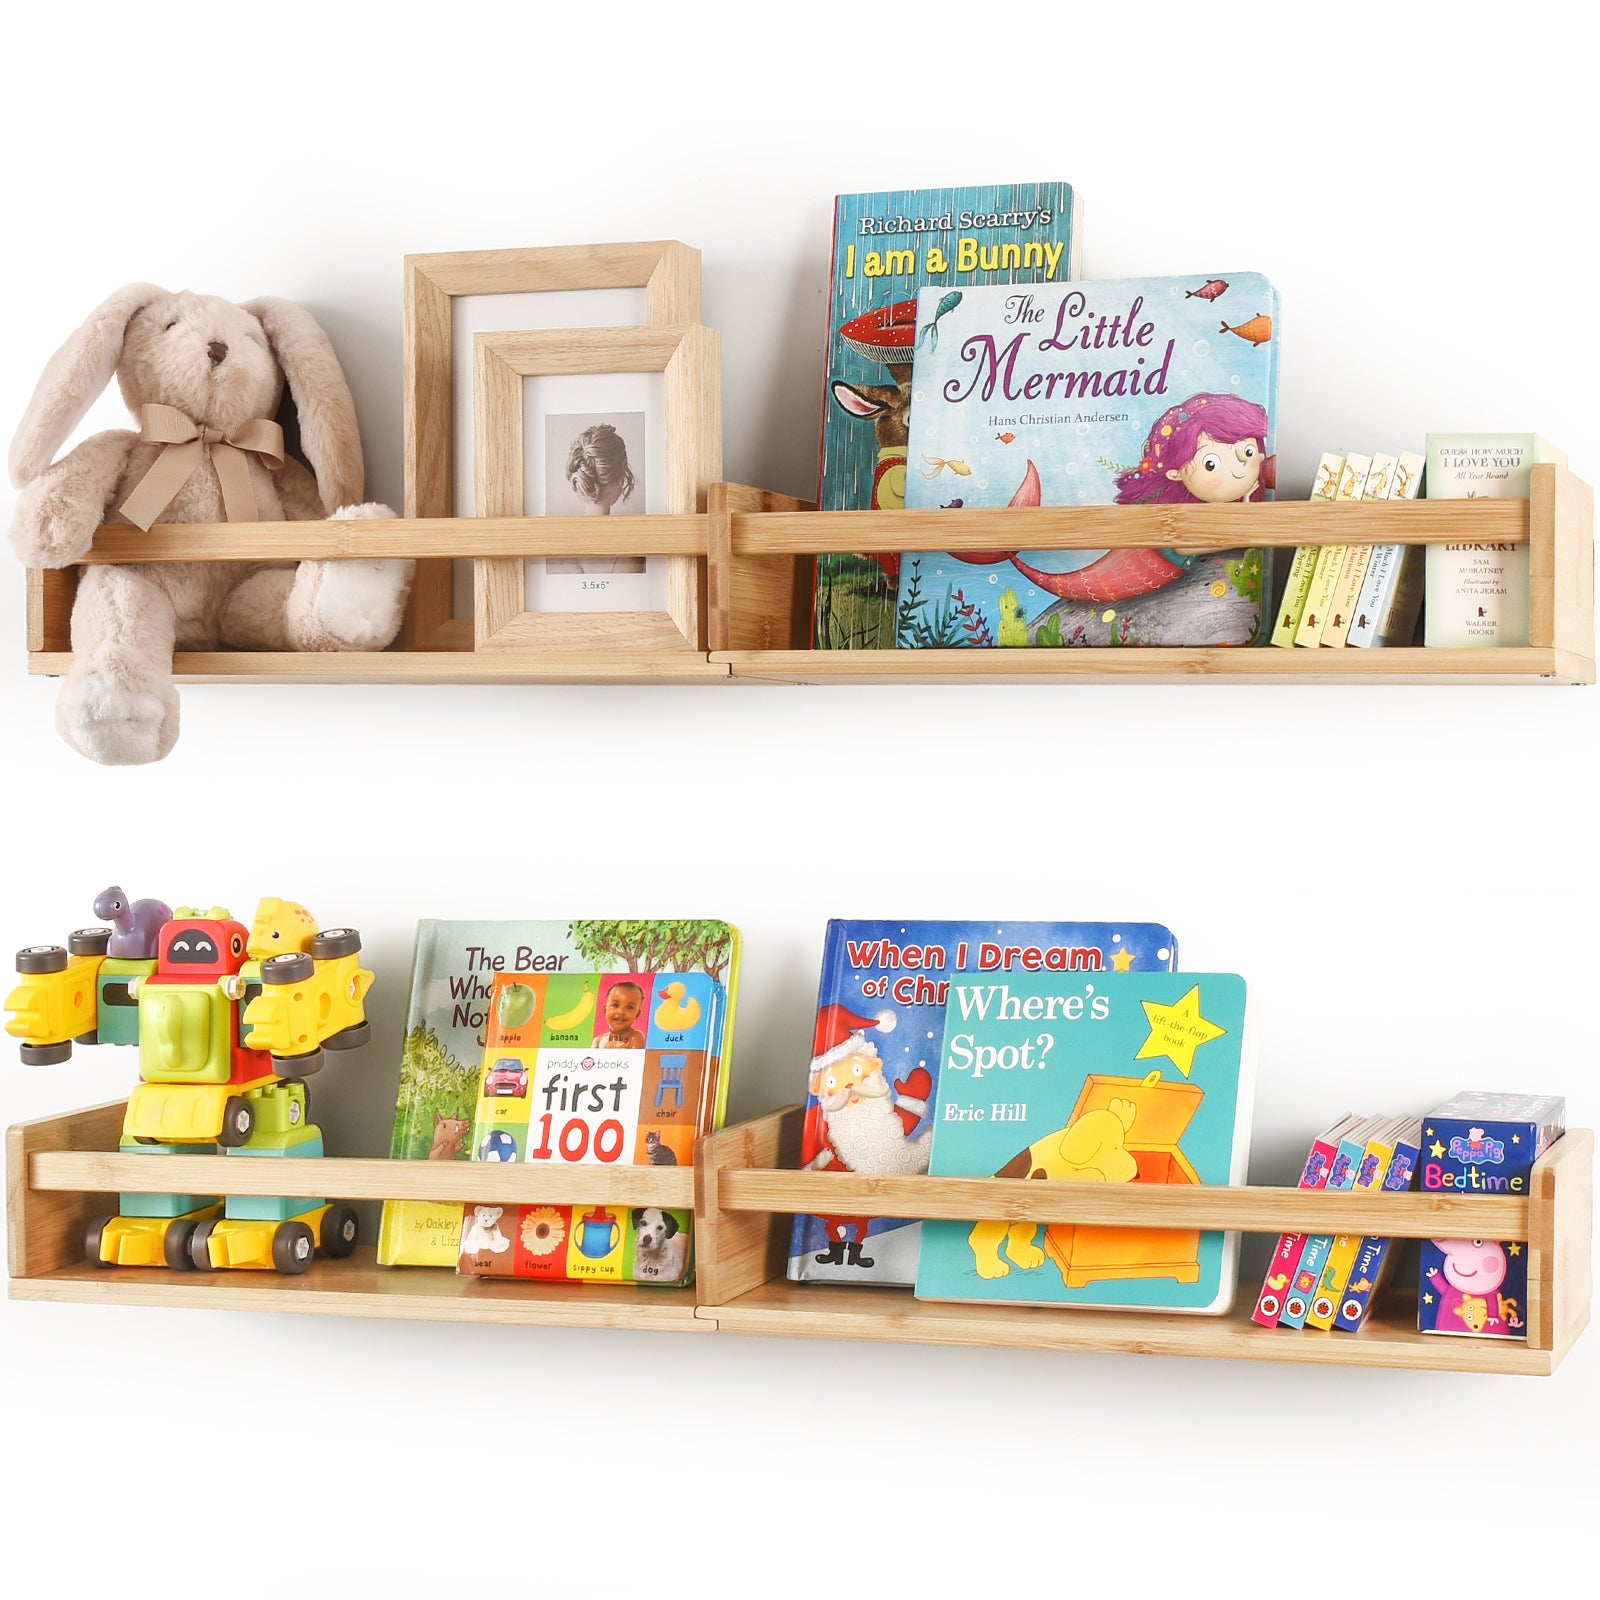 ZZM Bamboo Nursery Book Shelves Set of 2, 32 inch Floating Shelves Kids Bookshelf for Wall Decor and Toy Storage, Small Wall Shelf for Bedroom Living Room Kitchen Bathroom Office Frames